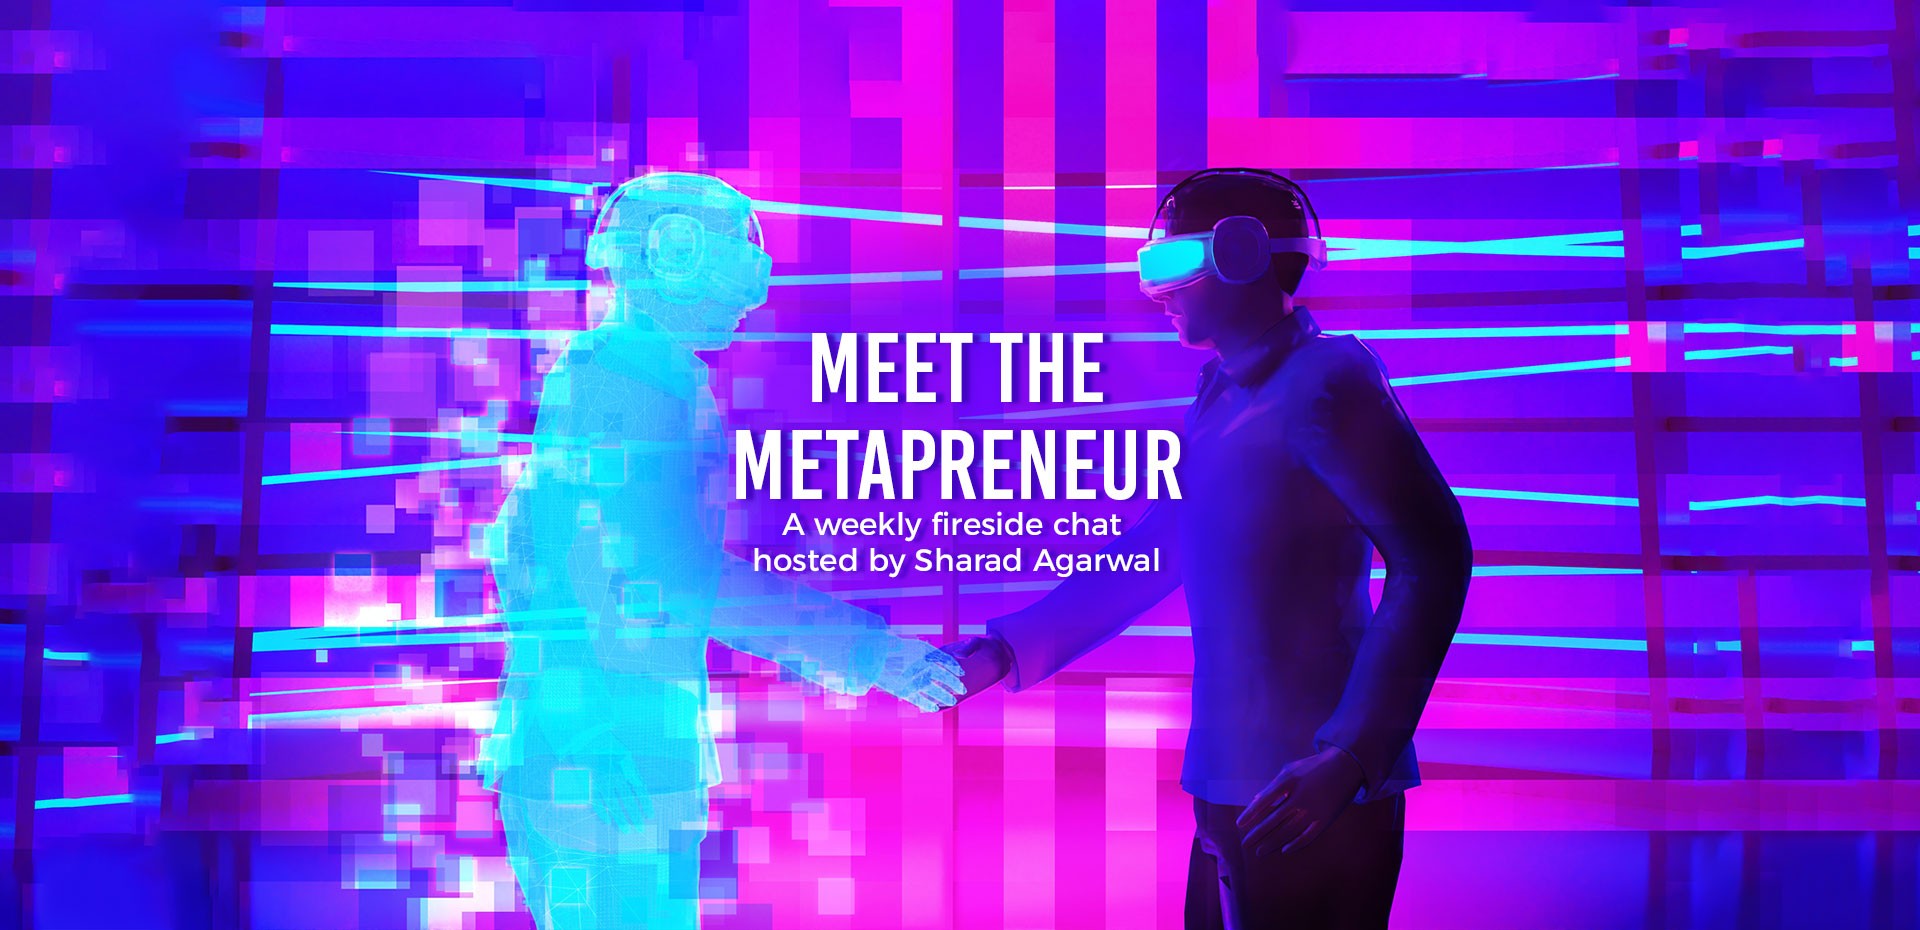 MEET THE METAPRENEUR: A Weekly Fireside Chat Hosted By Sharad Agarwal